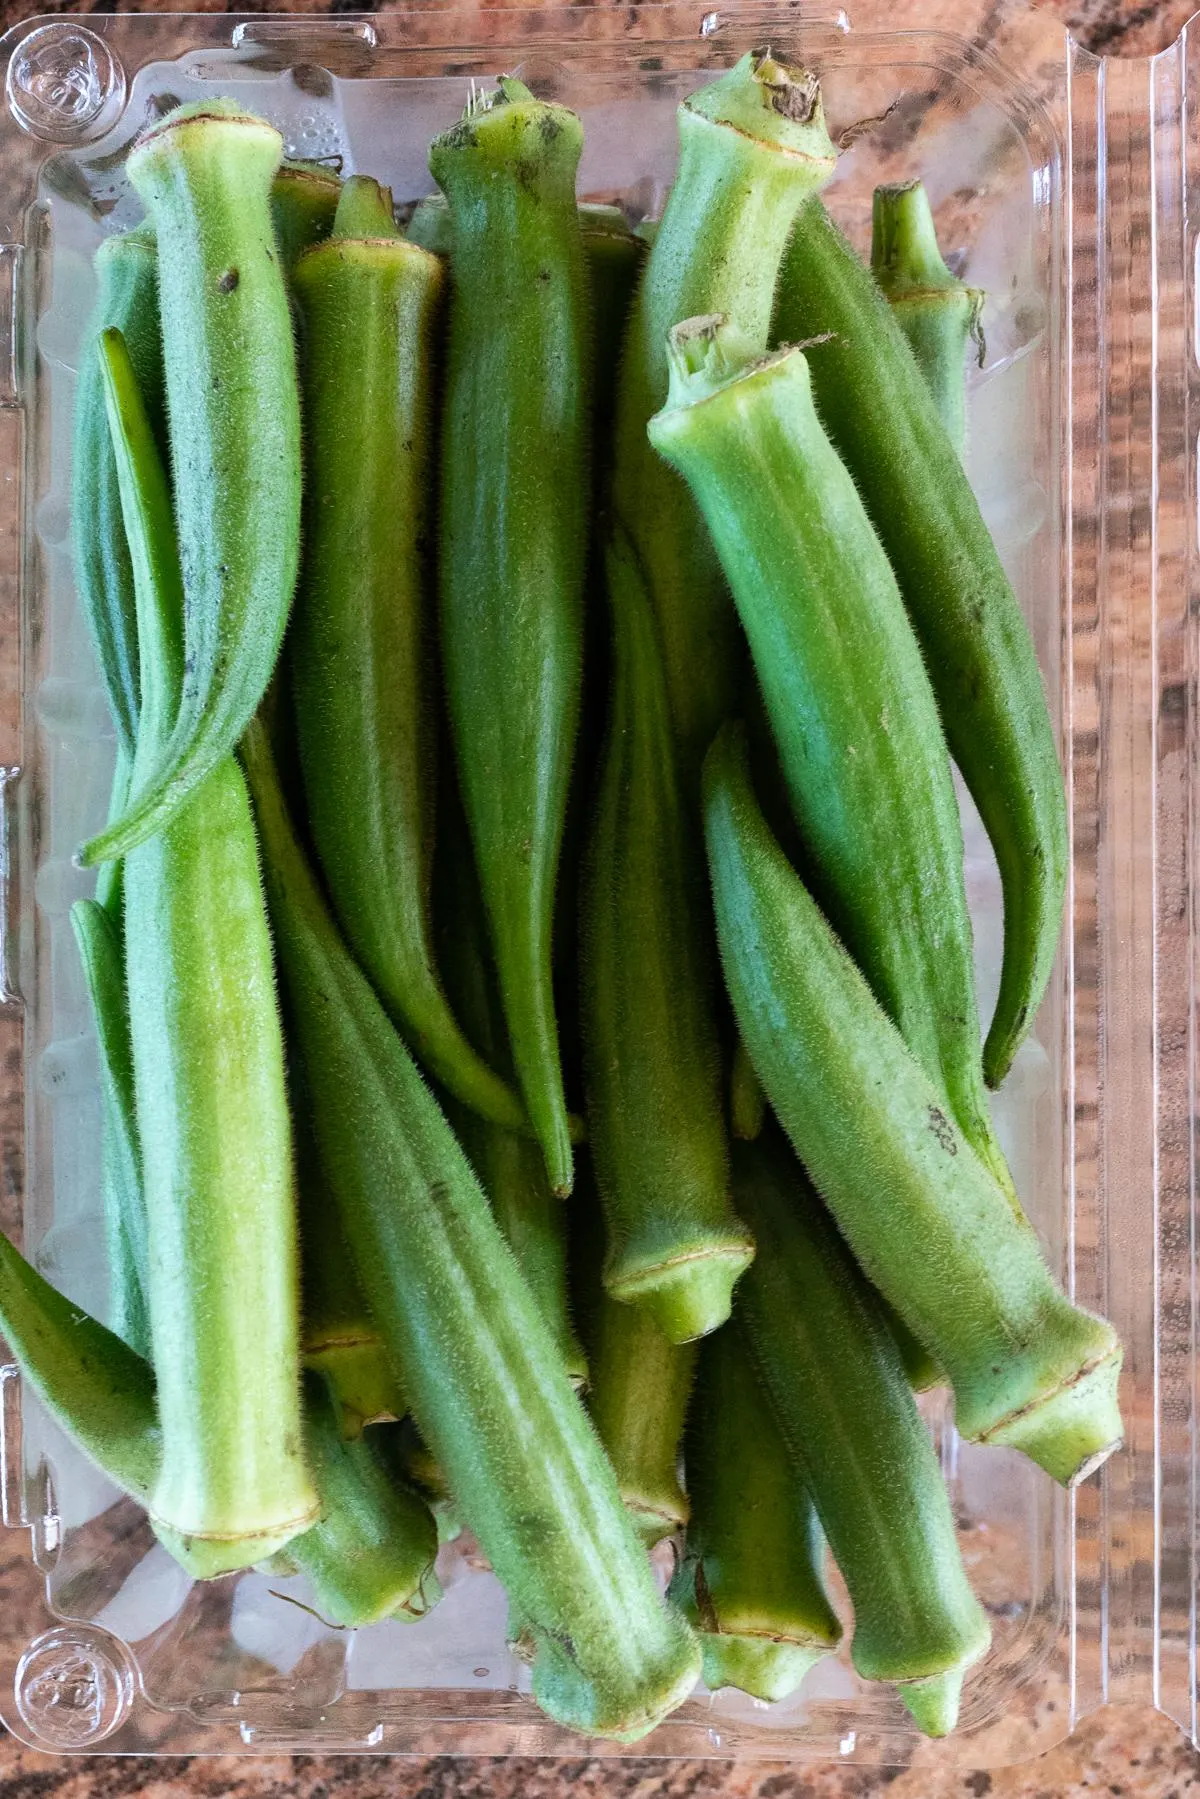 A container of fresh, raw, okra.